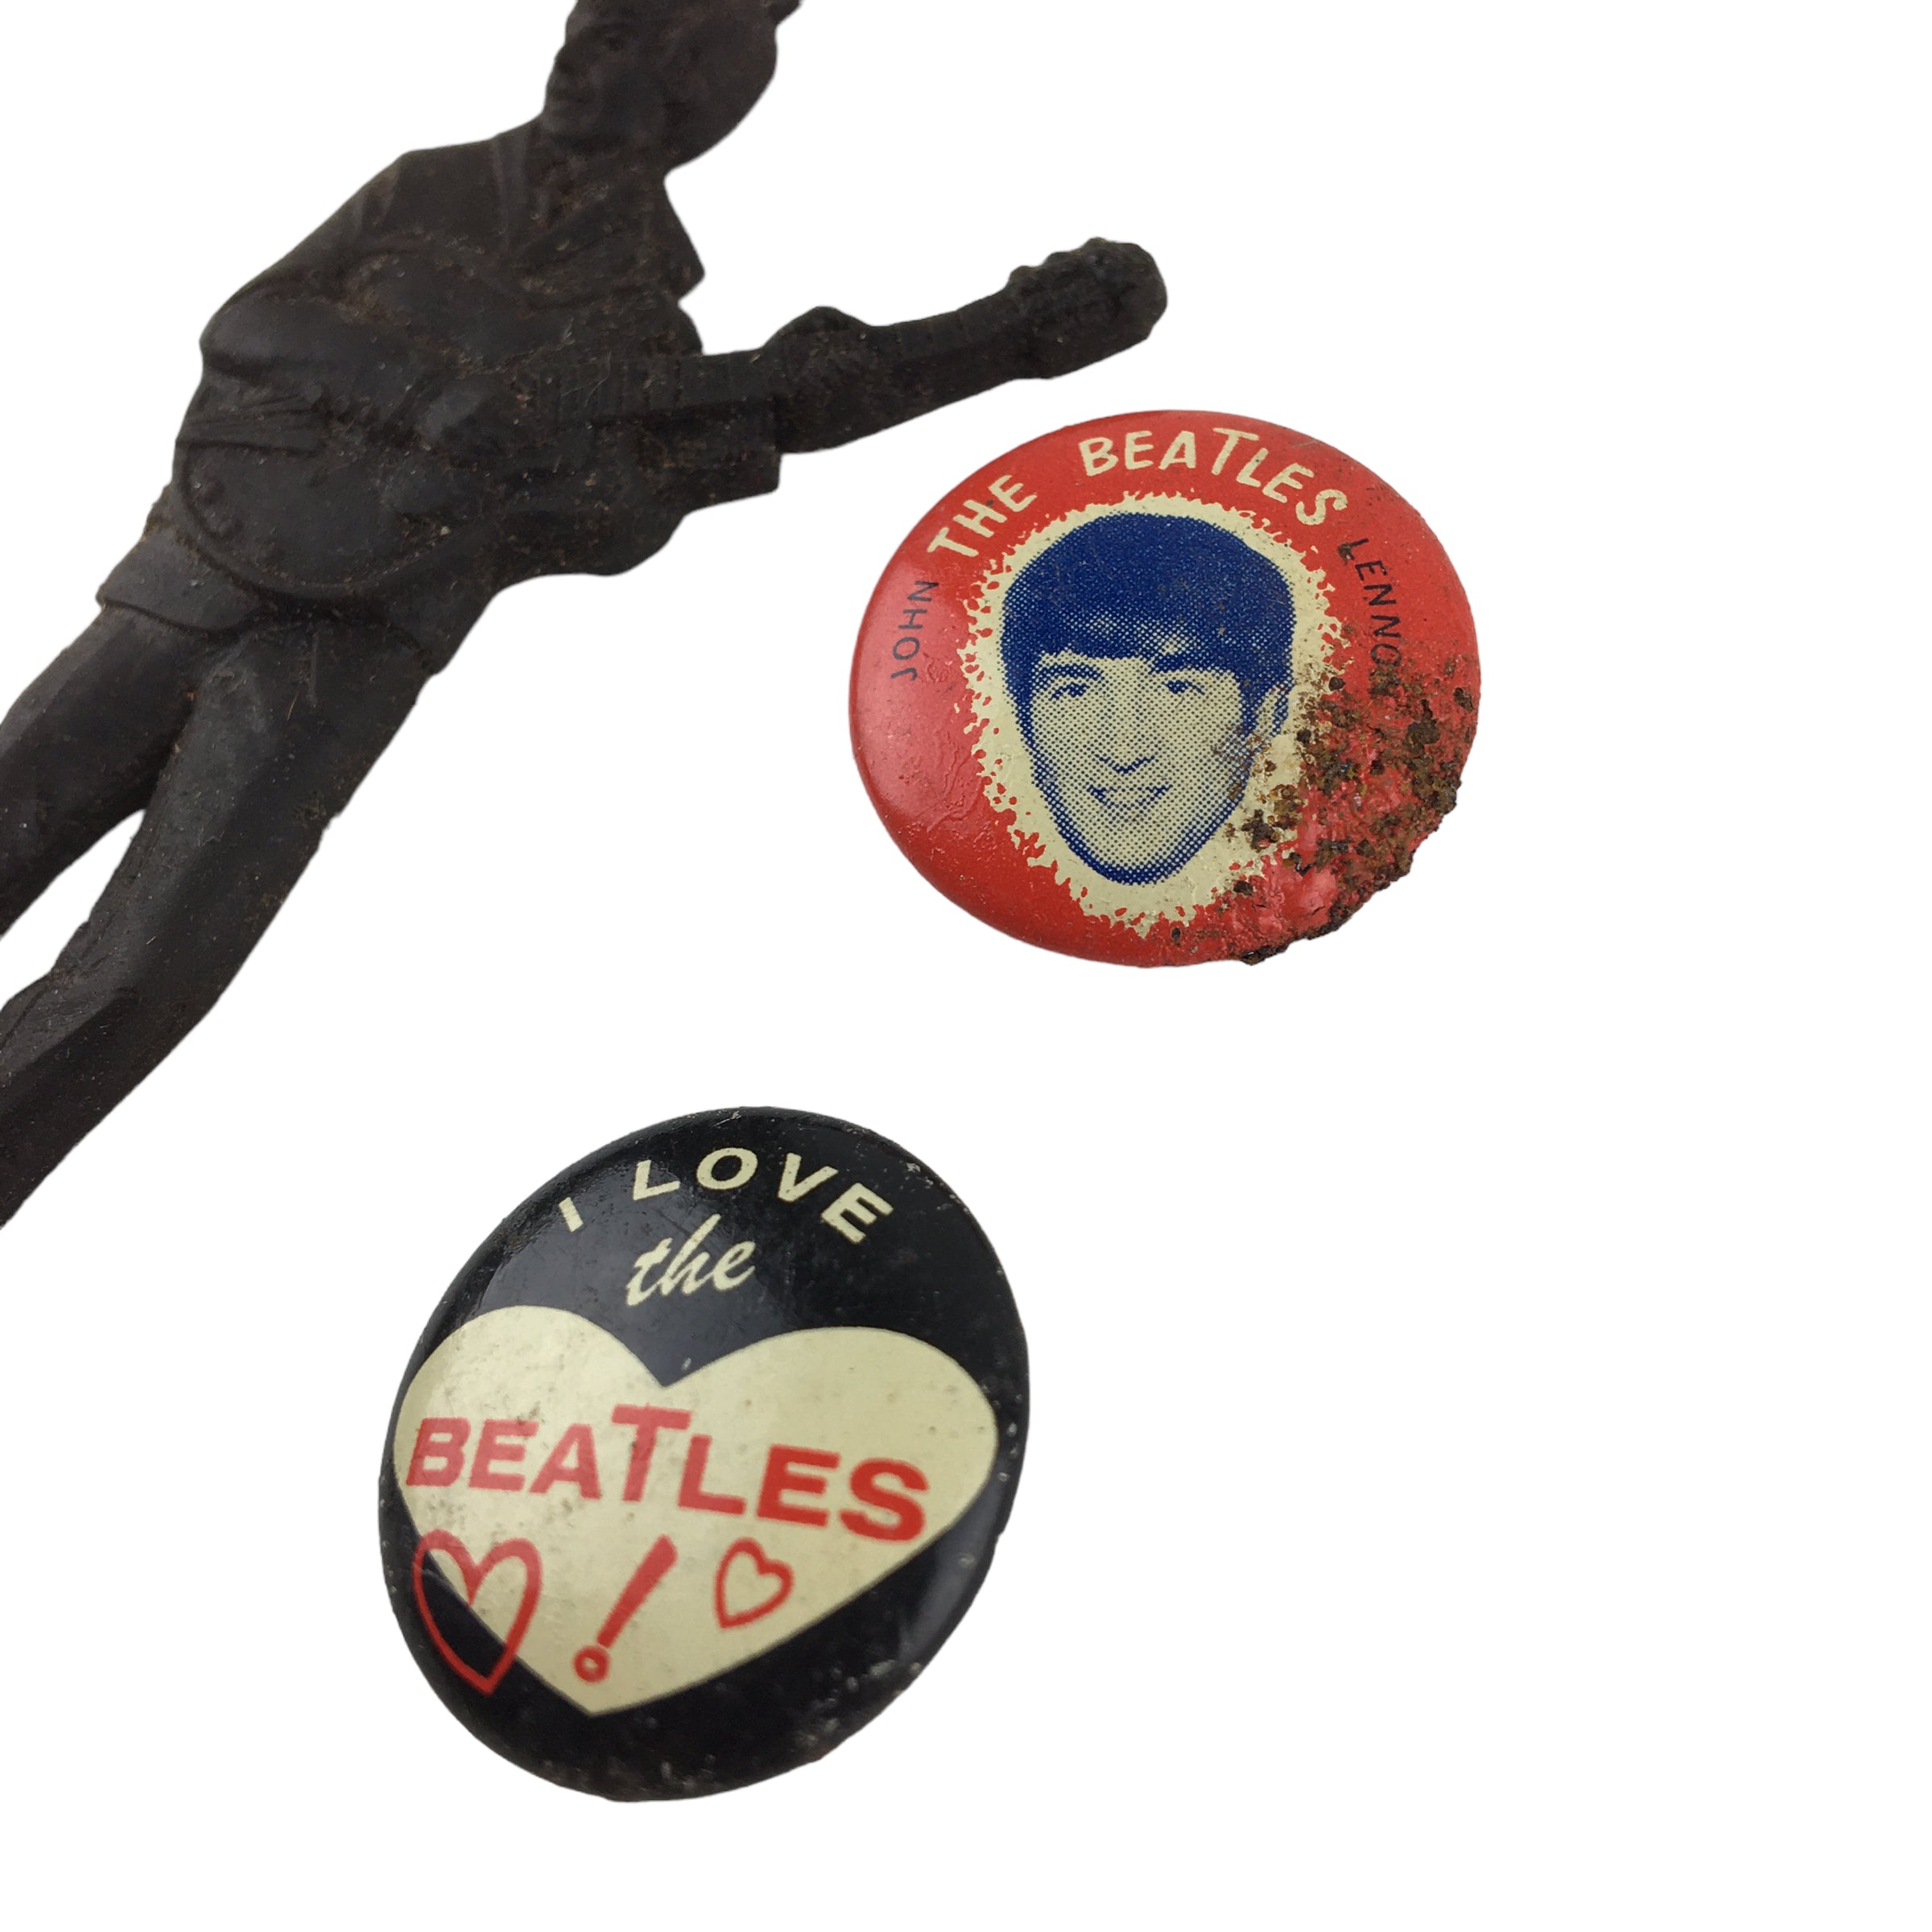 Sold at Auction: Band pins, patches, bumper stickers, Beatles